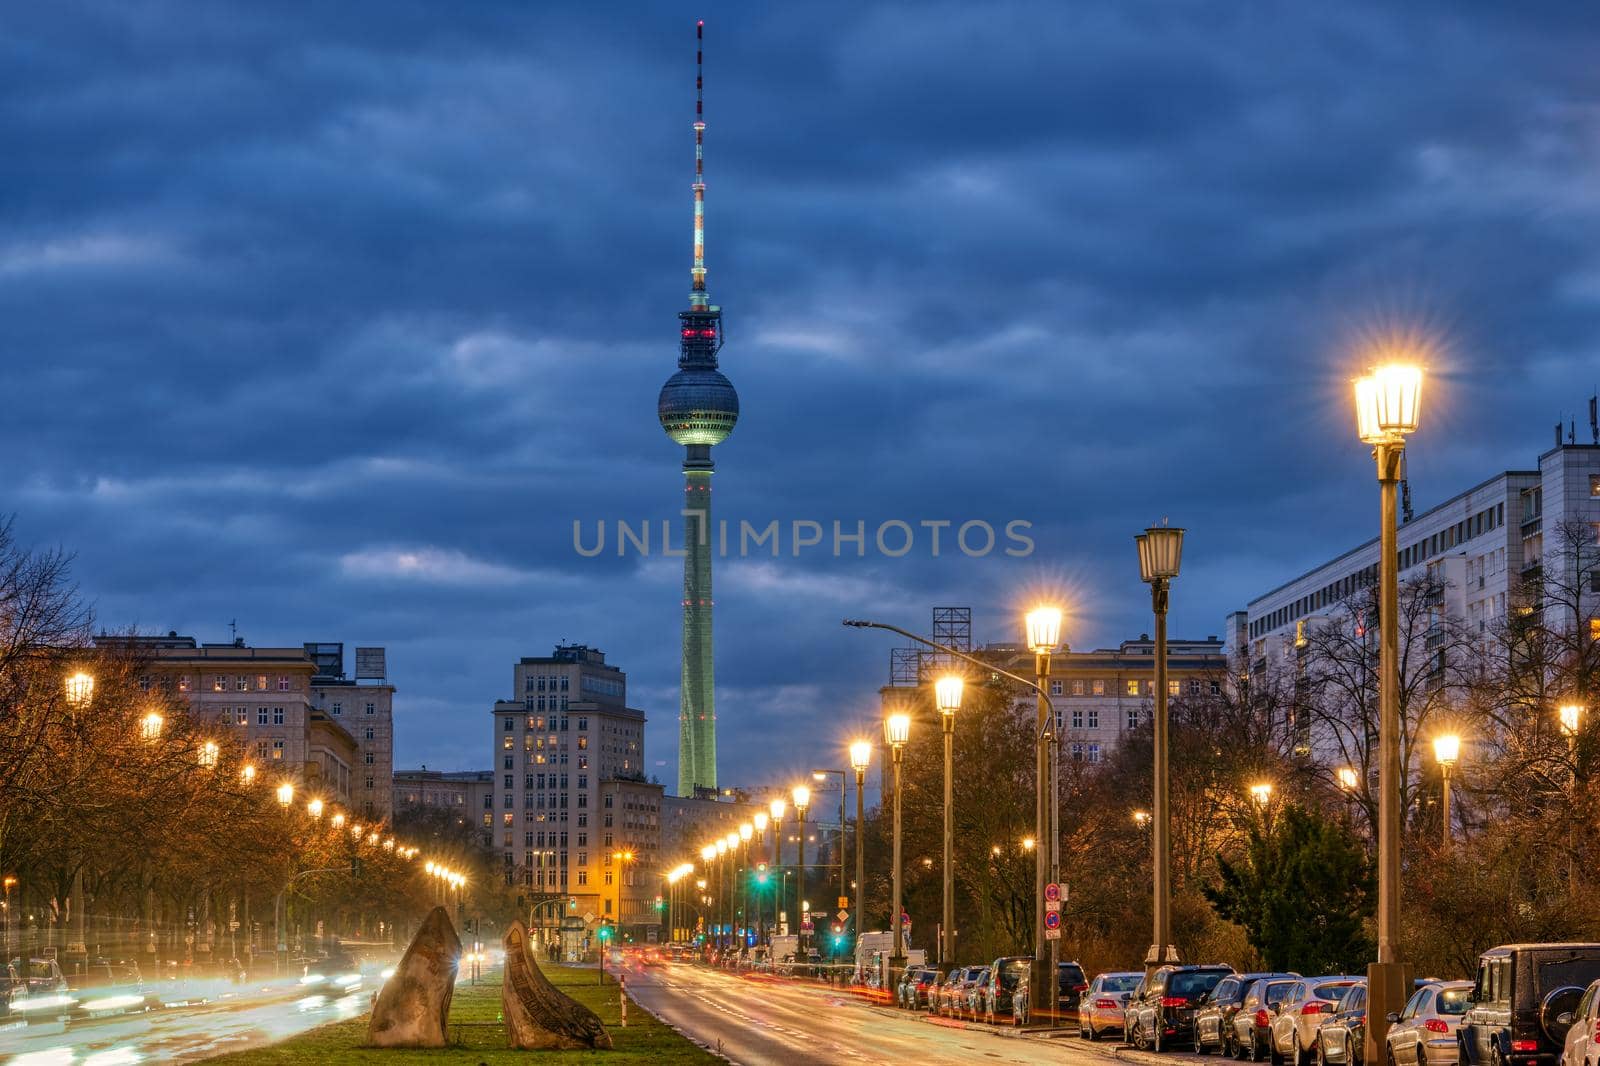 The famous TV Tower of Berlin at night by elxeneize